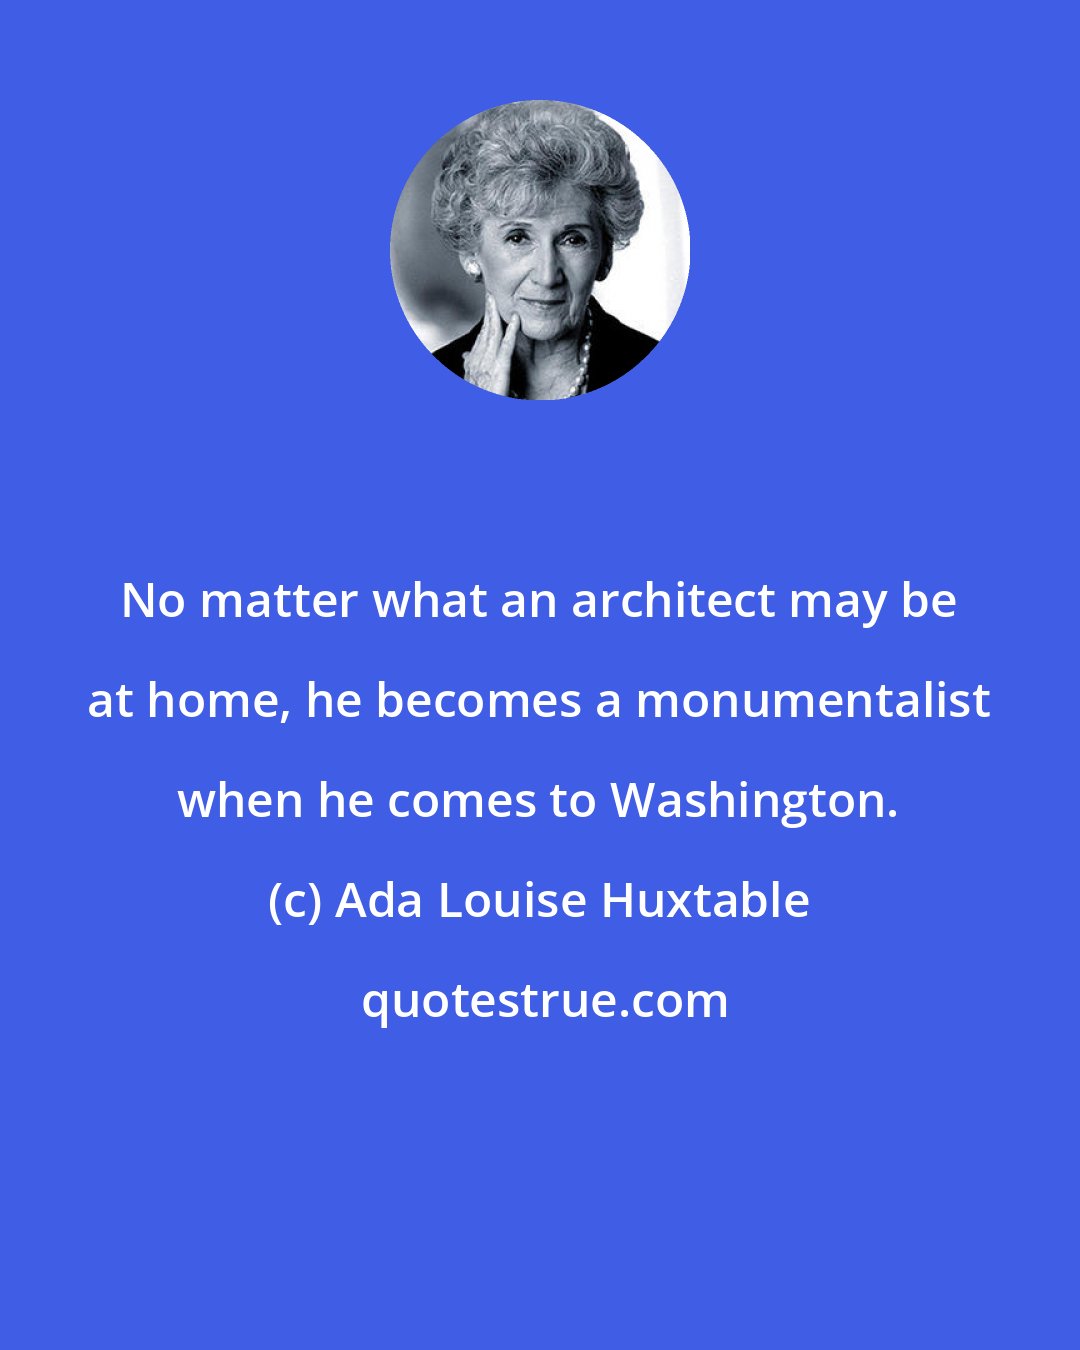 Ada Louise Huxtable: No matter what an architect may be at home, he becomes a monumentalist when he comes to Washington.